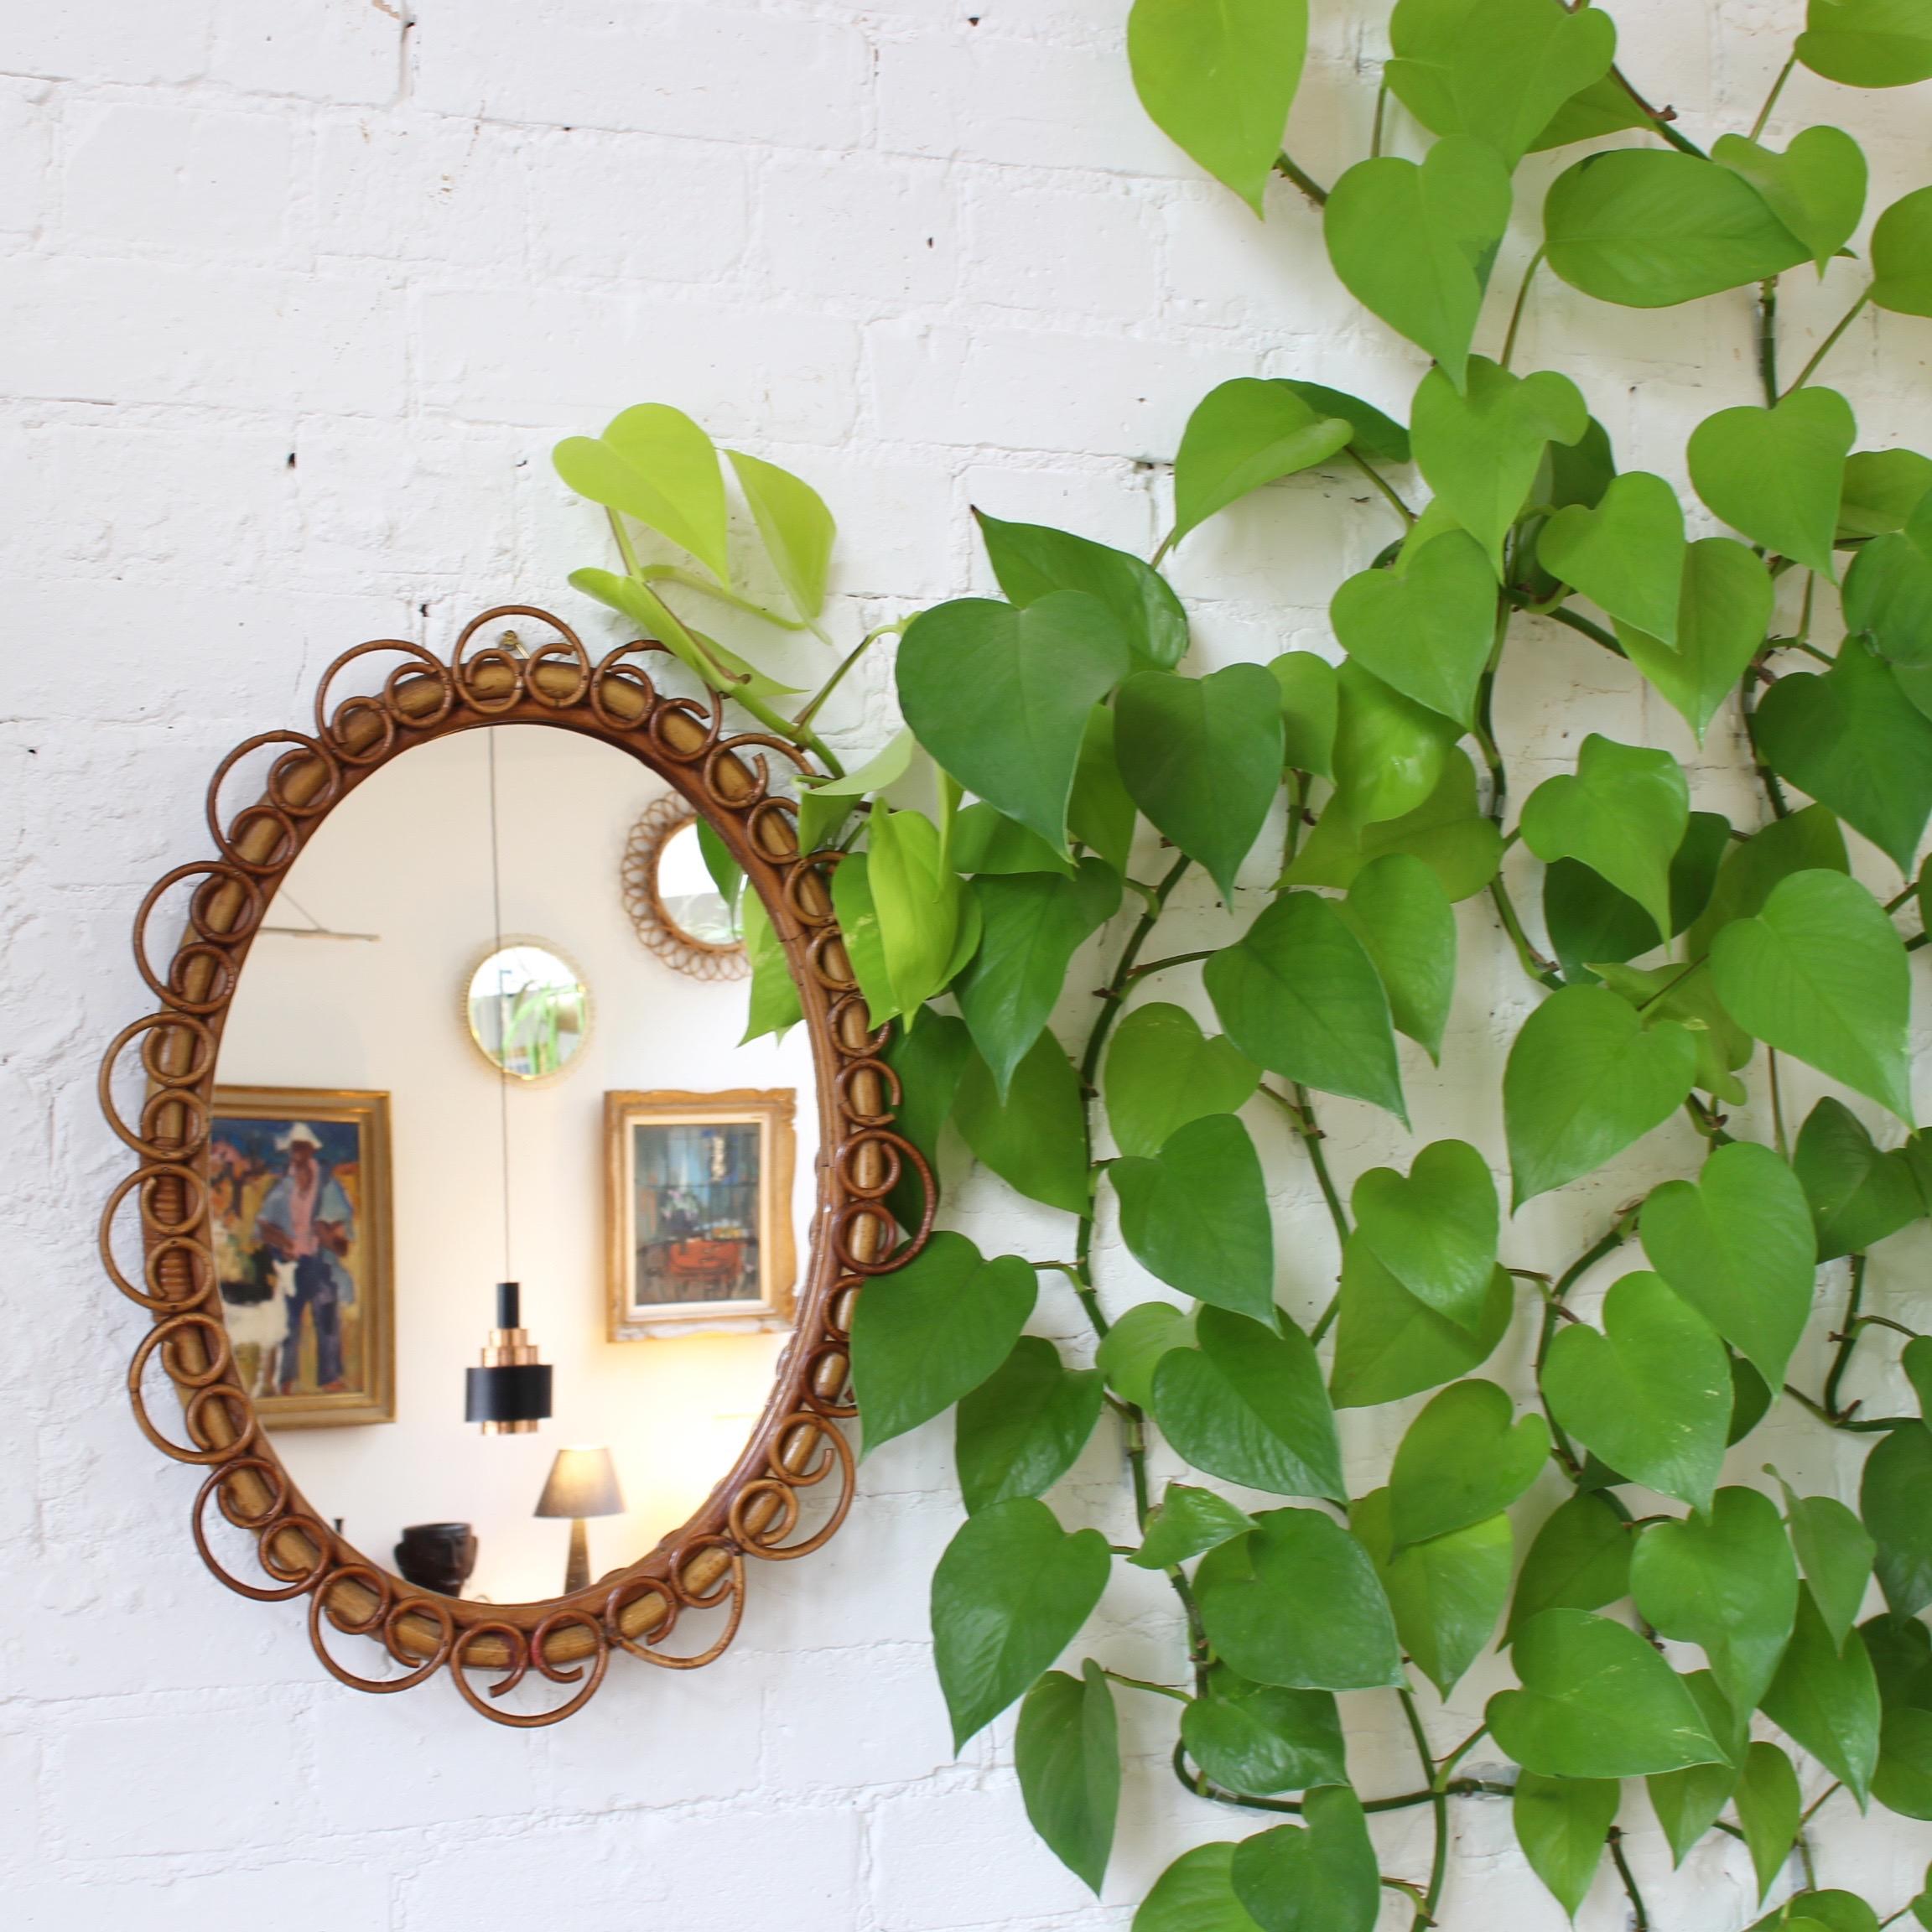 Italian oval-shaped rattan and bamboo wall mirror, circa 1960s. This mirror has a very charming oval shape with rattan pretzel-forms framing the glass. There is a characterful, aged patina on the mirror frame and many of the decorative forms. One of